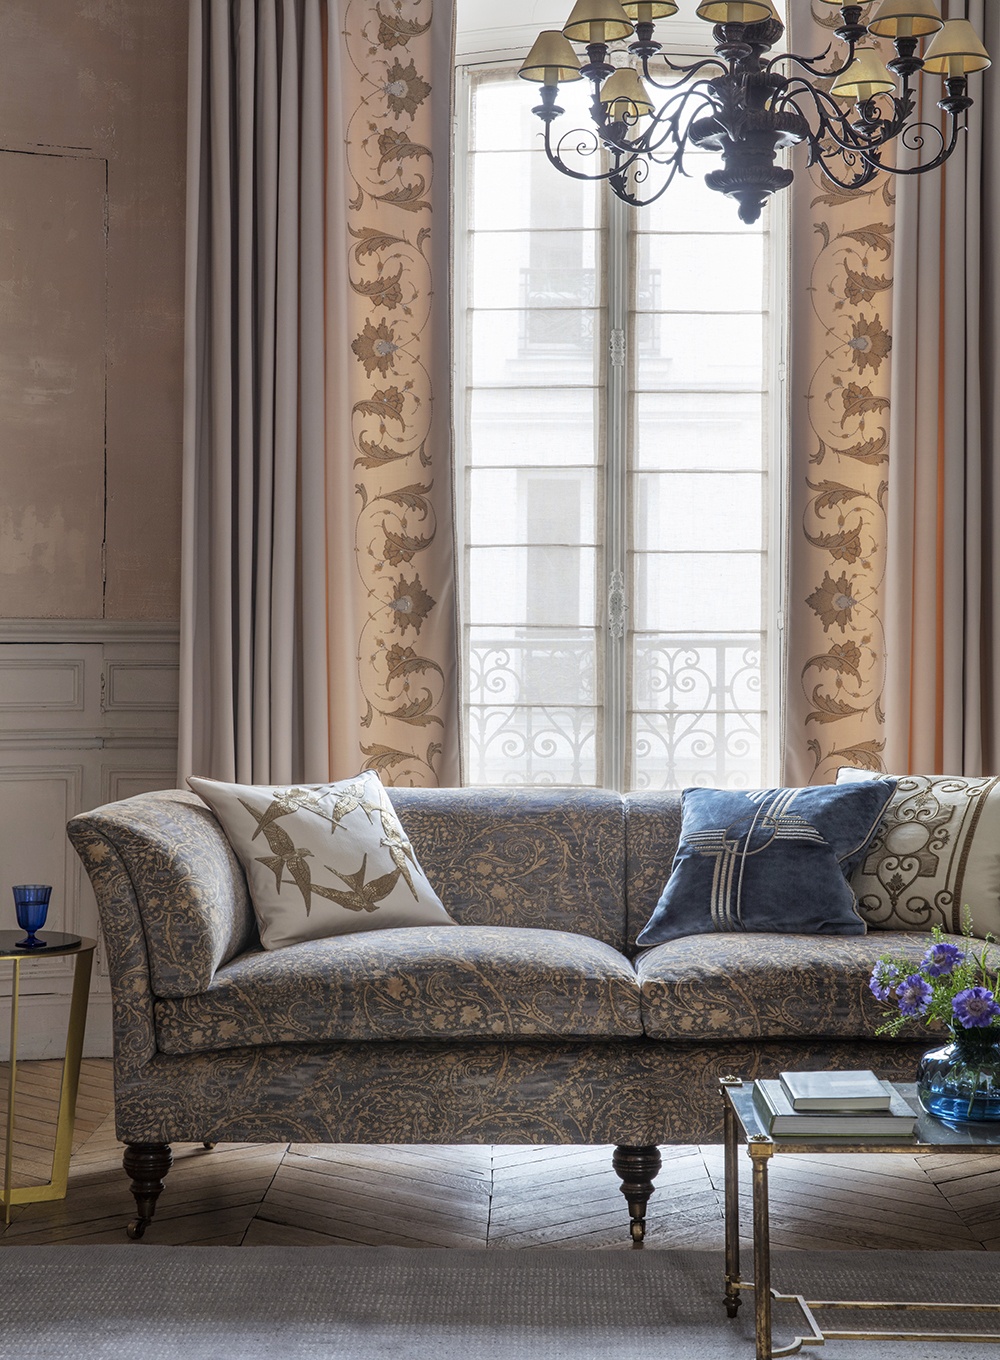 Earhart cushion in Capri - Nankin with Cordoba cushion in Lagan - Light gold, Pompadour sofa and Rigoletto embroidery on drapes in Eriskay - Shell